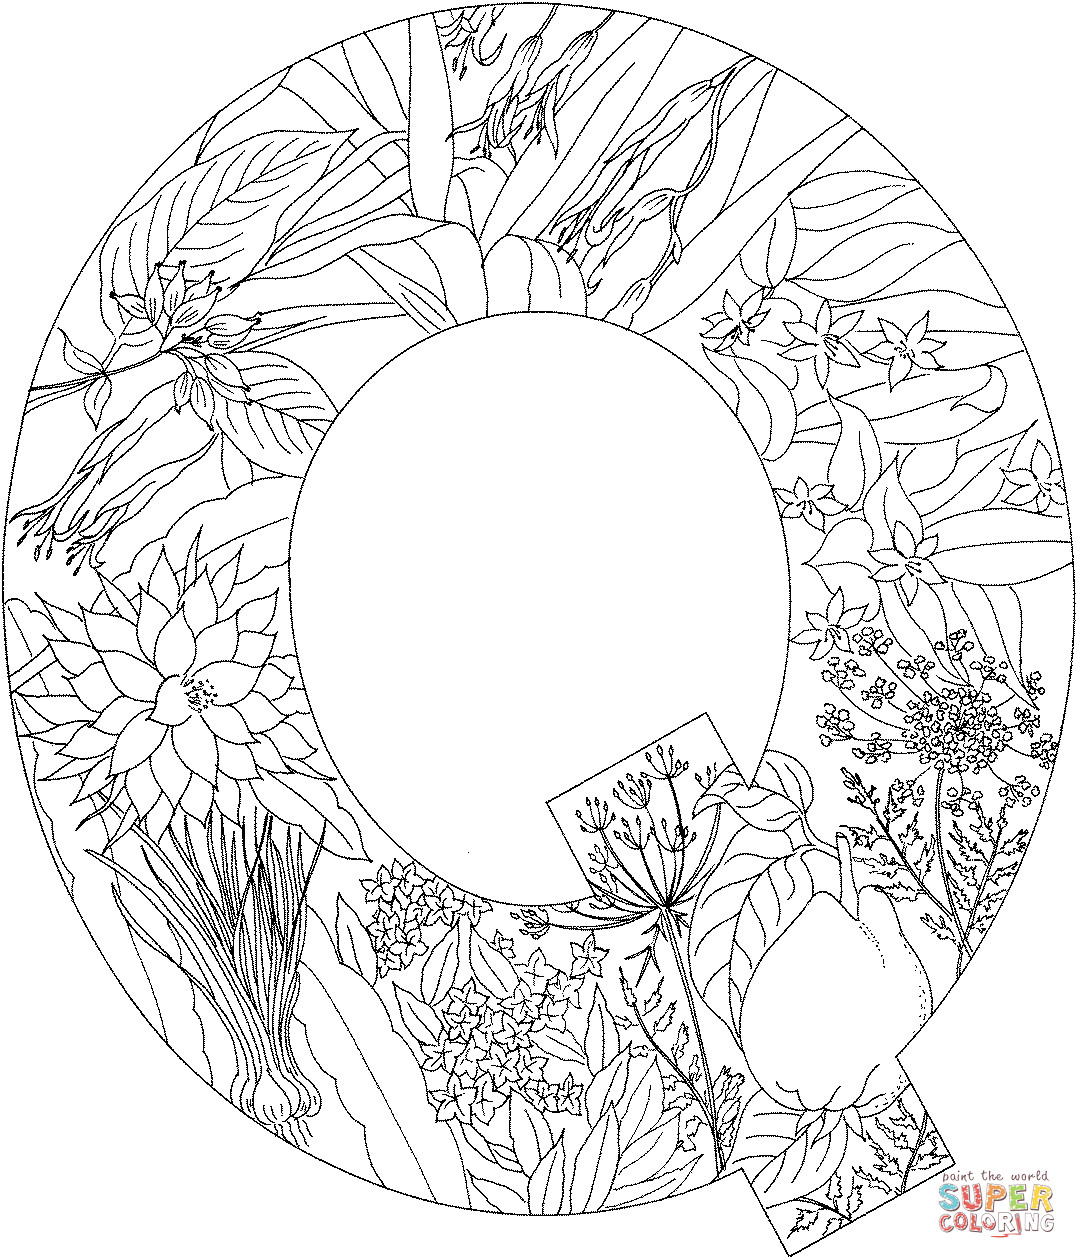 Letter Q Coloring Pages
 Letter Q with Plants coloring page